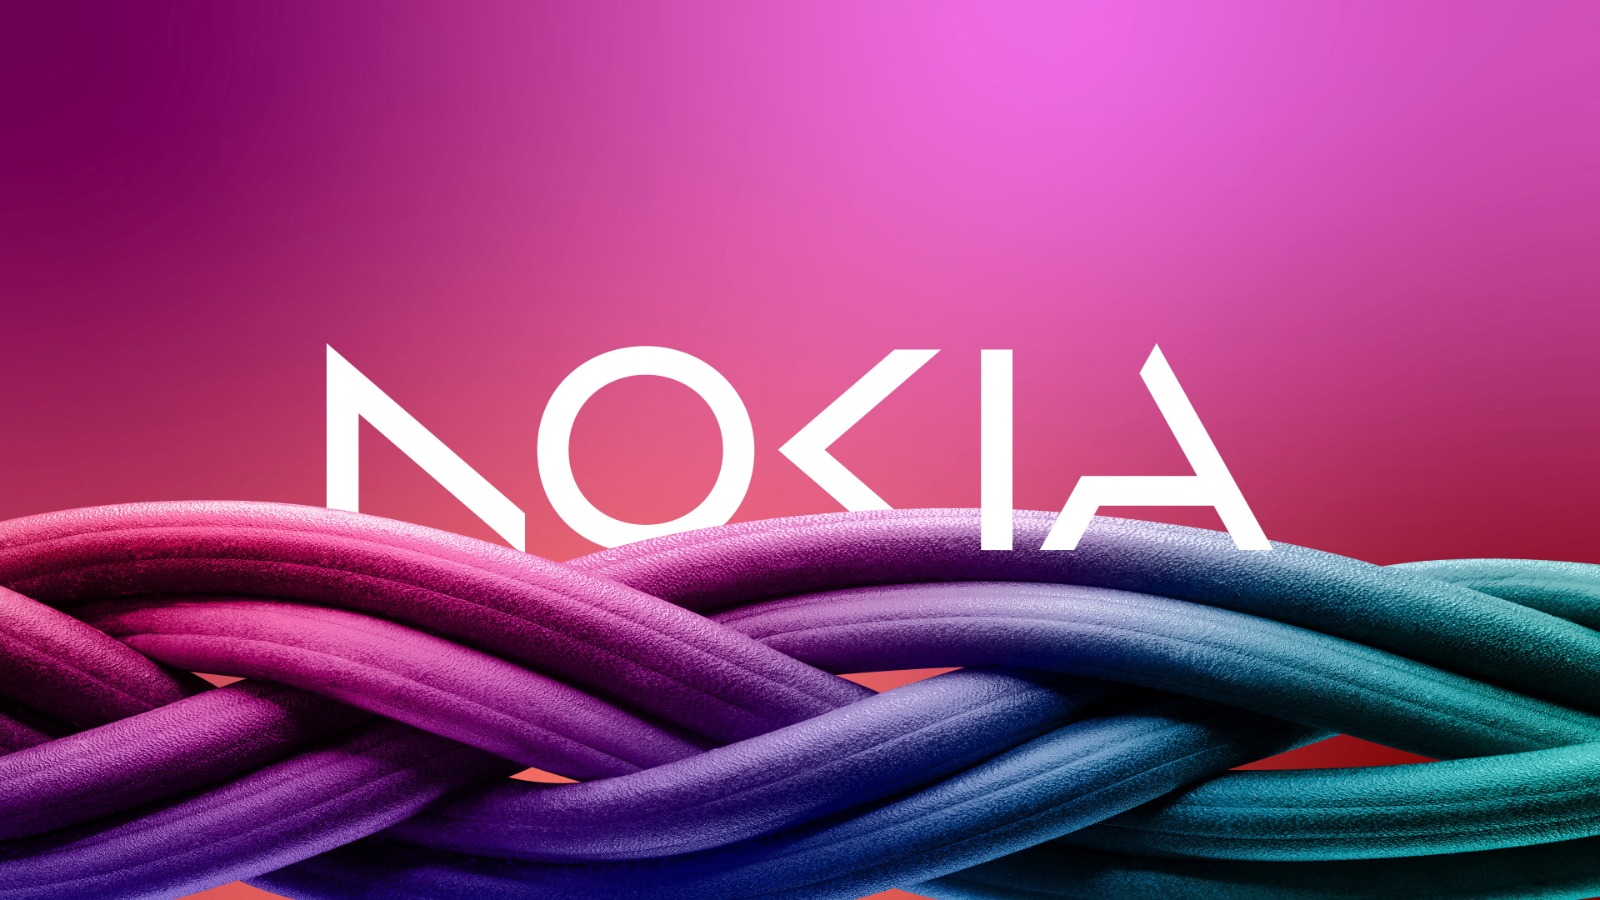 Nokia changes iconic logo to signal strategy 